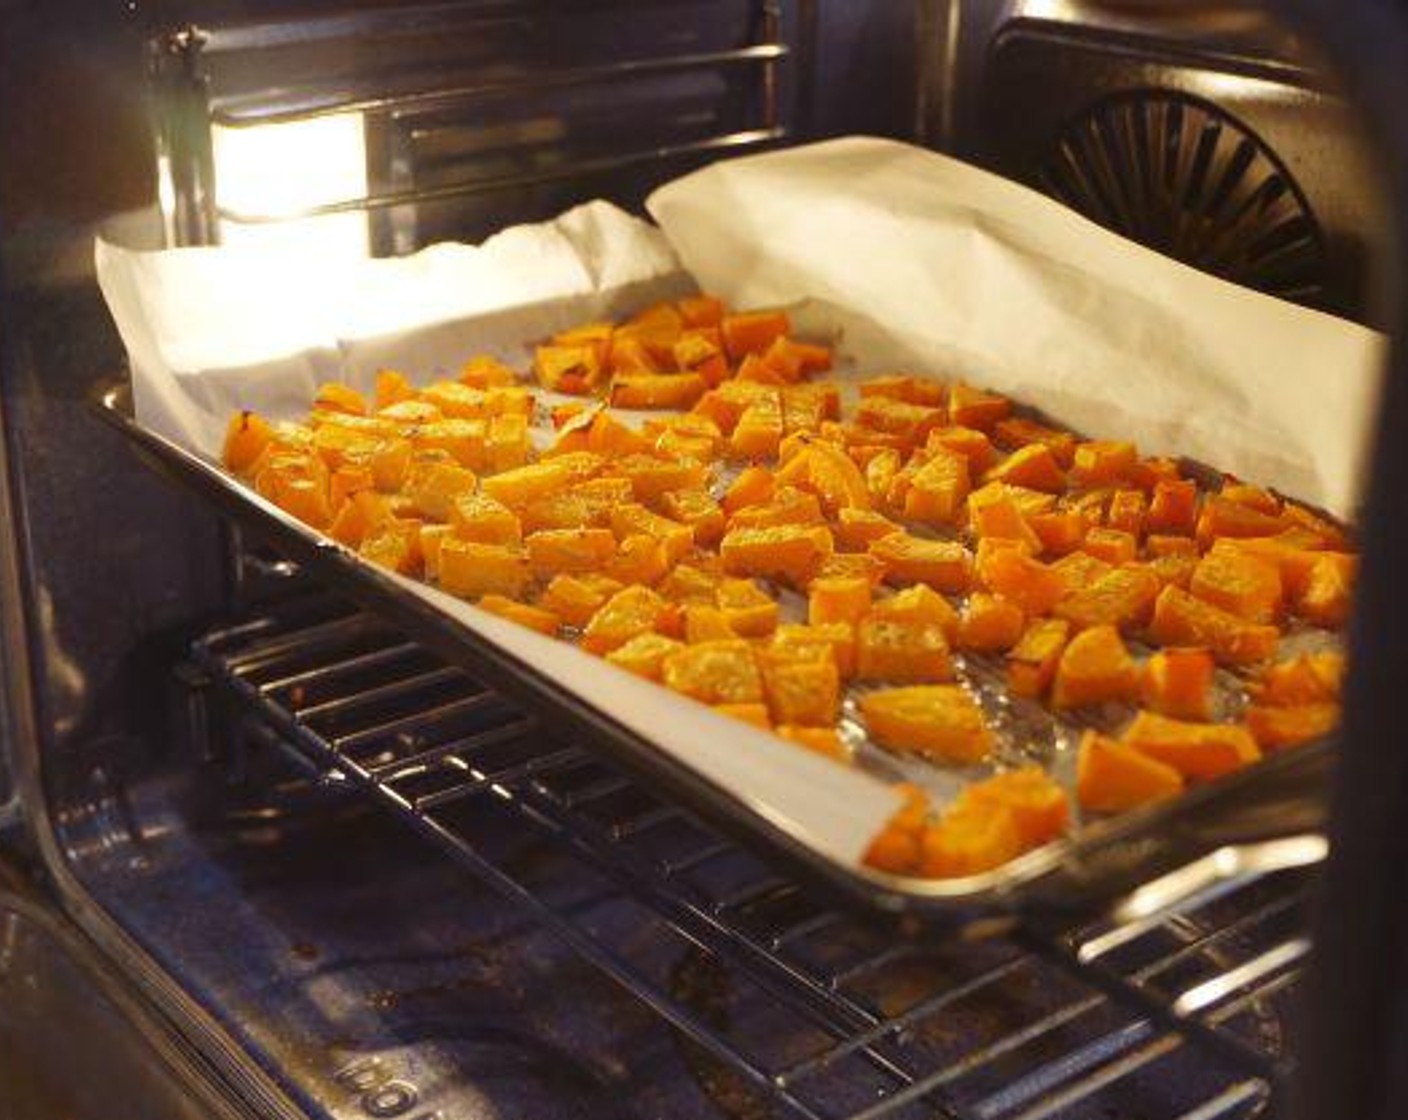 step 2 Spread Butternut Squash (3/4 cup) evenly over a parchment covered baking sheet, drizzle with Extra-Virgin Olive Oil (1 Tbsp) and bake until tender for 30-40 minutes.